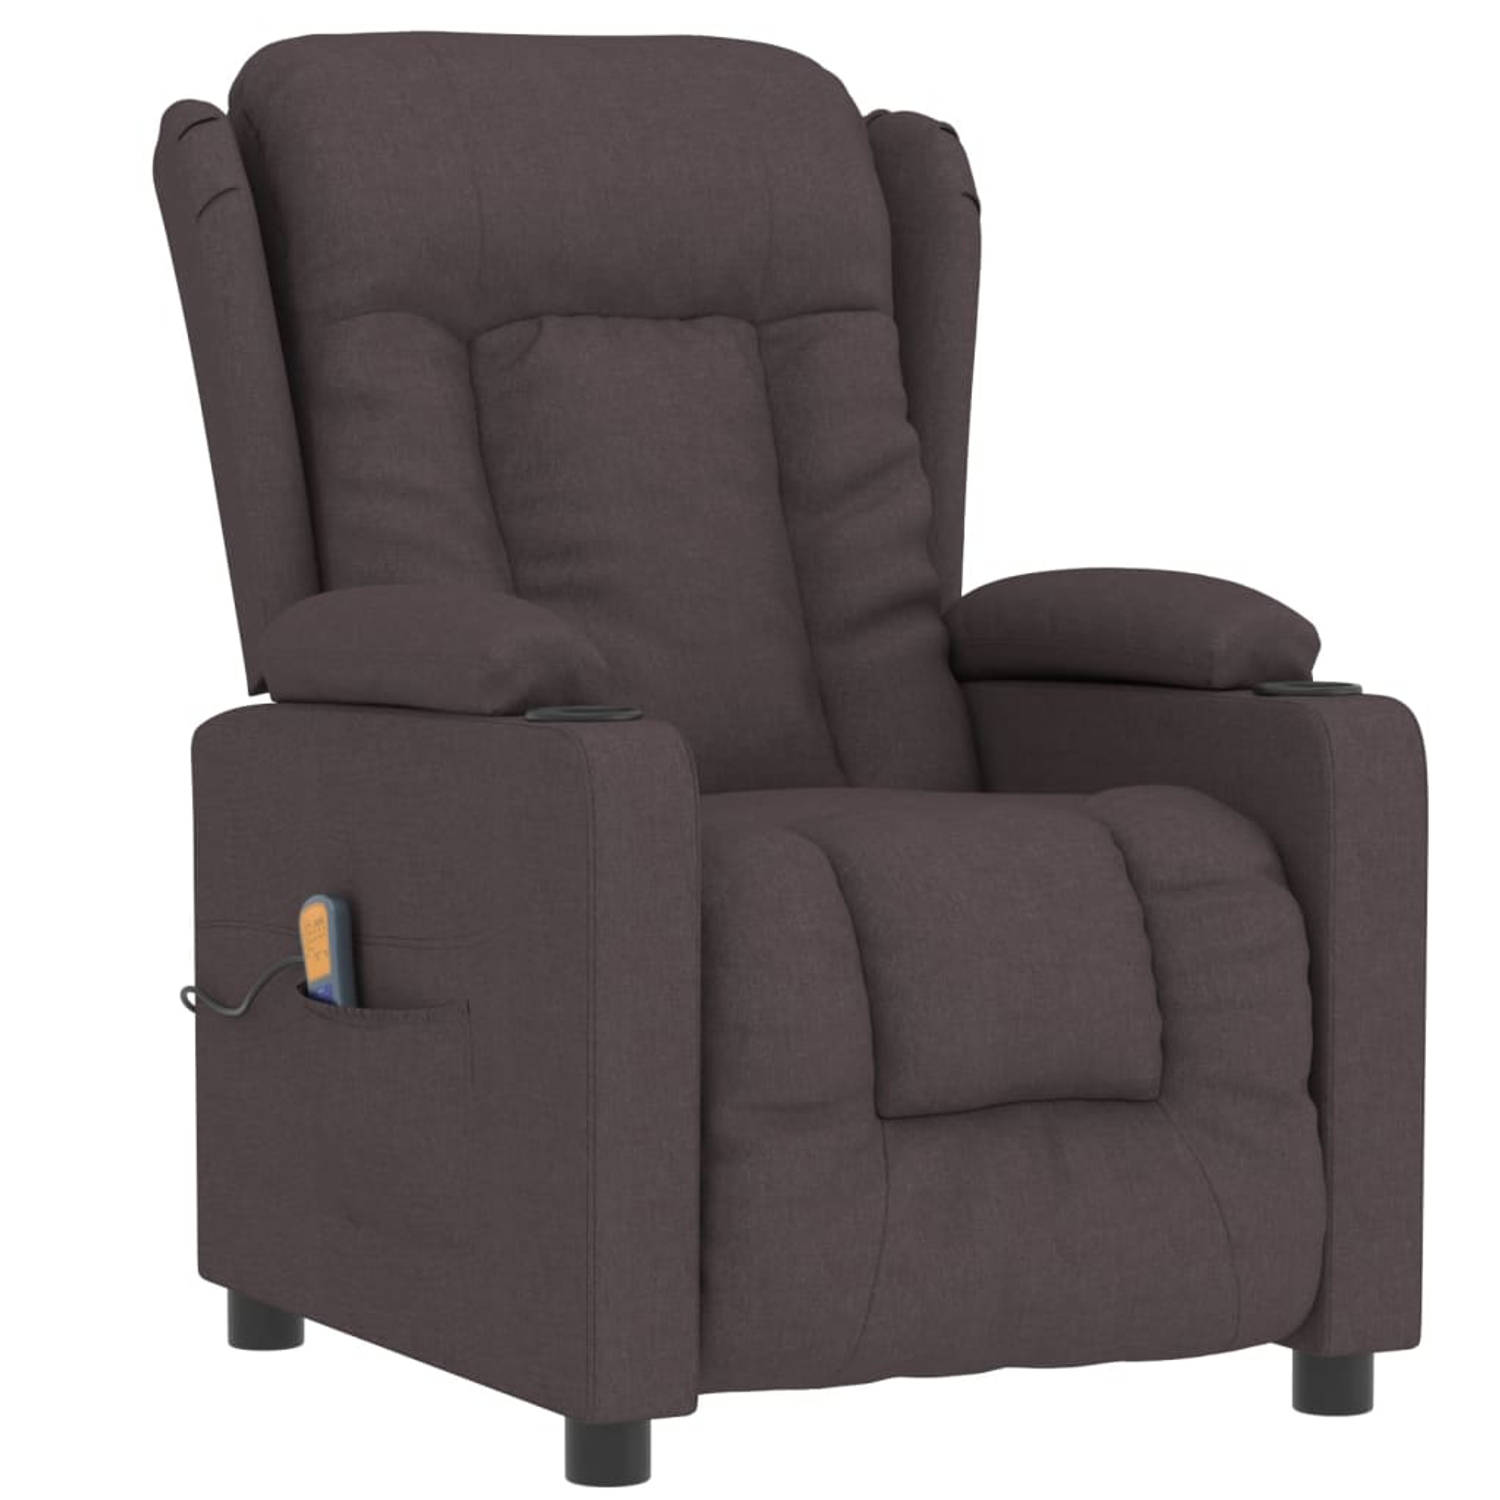 The Living Store Massagestoel stof donkerbruin - Fauteuil